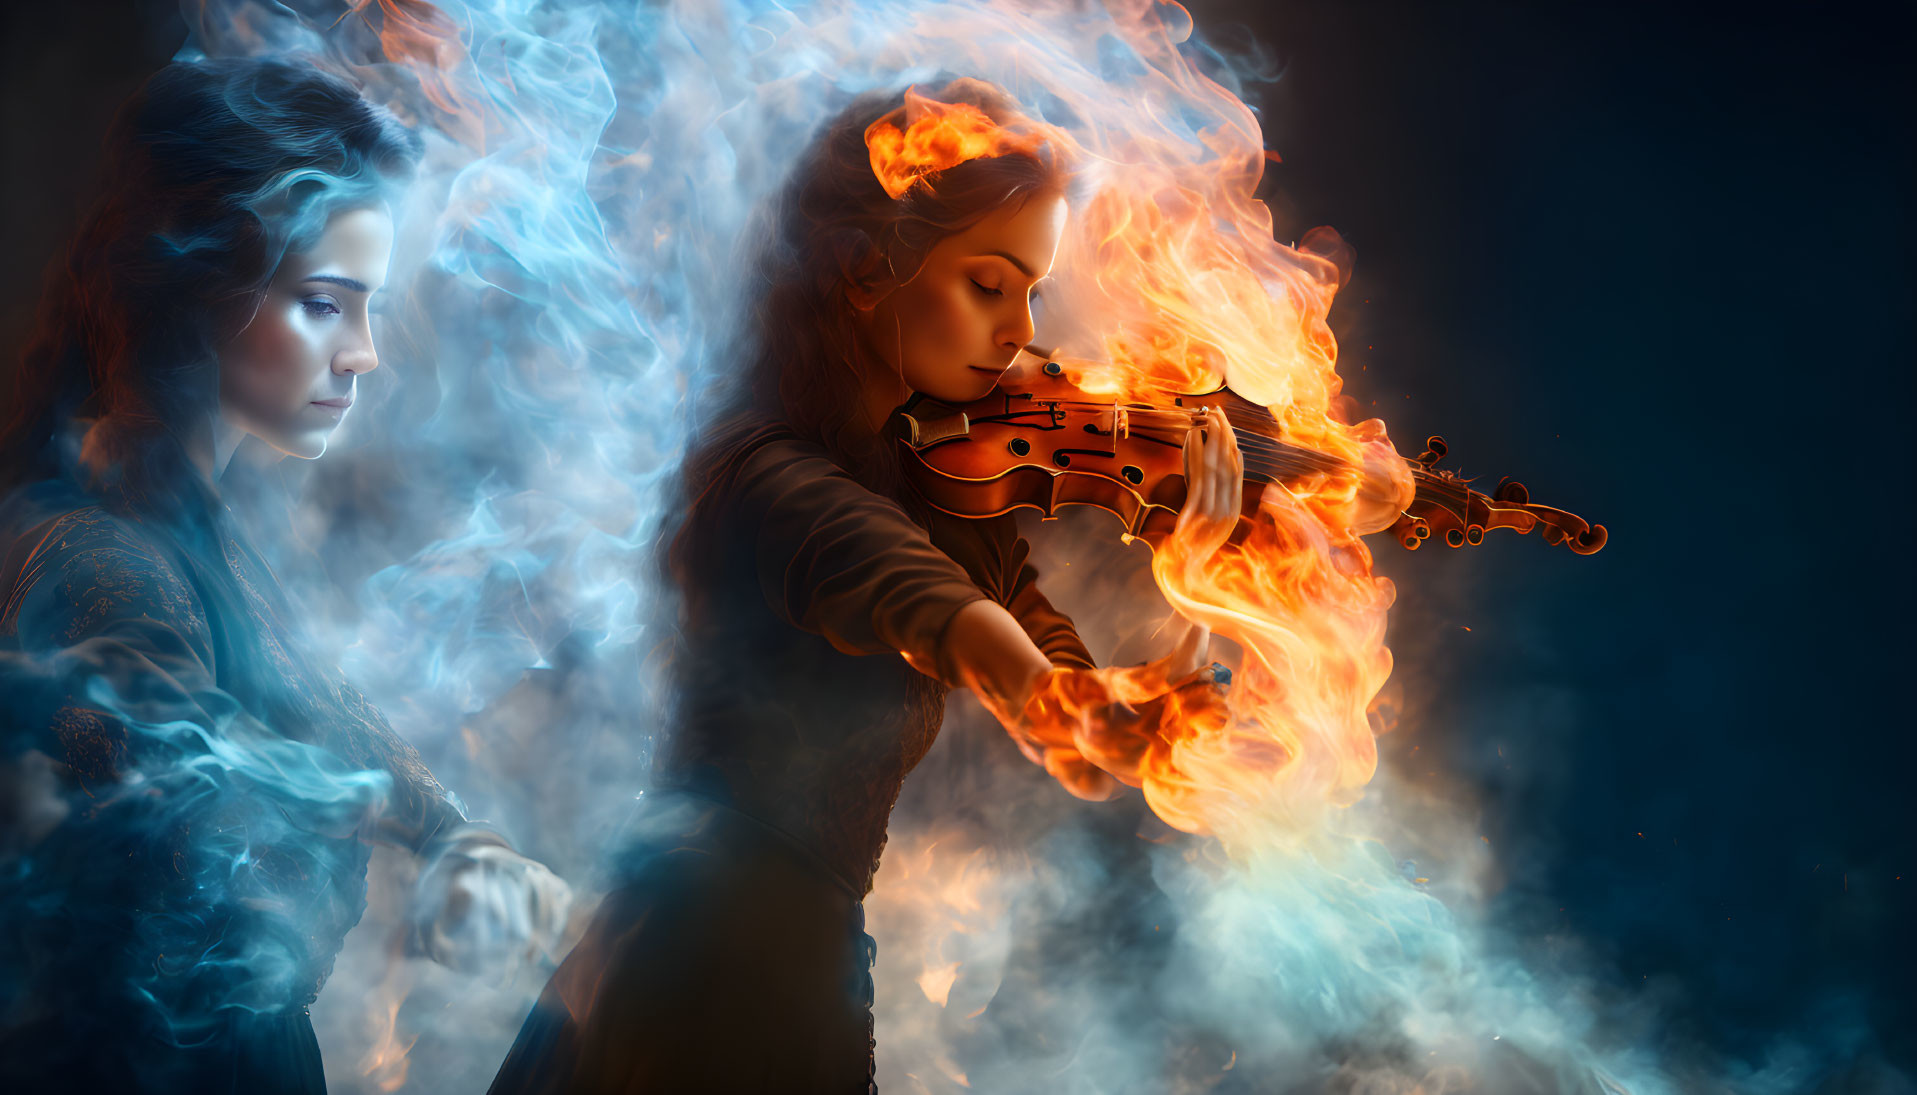 Woman playing flaming violin with ghostly reflection on dark background